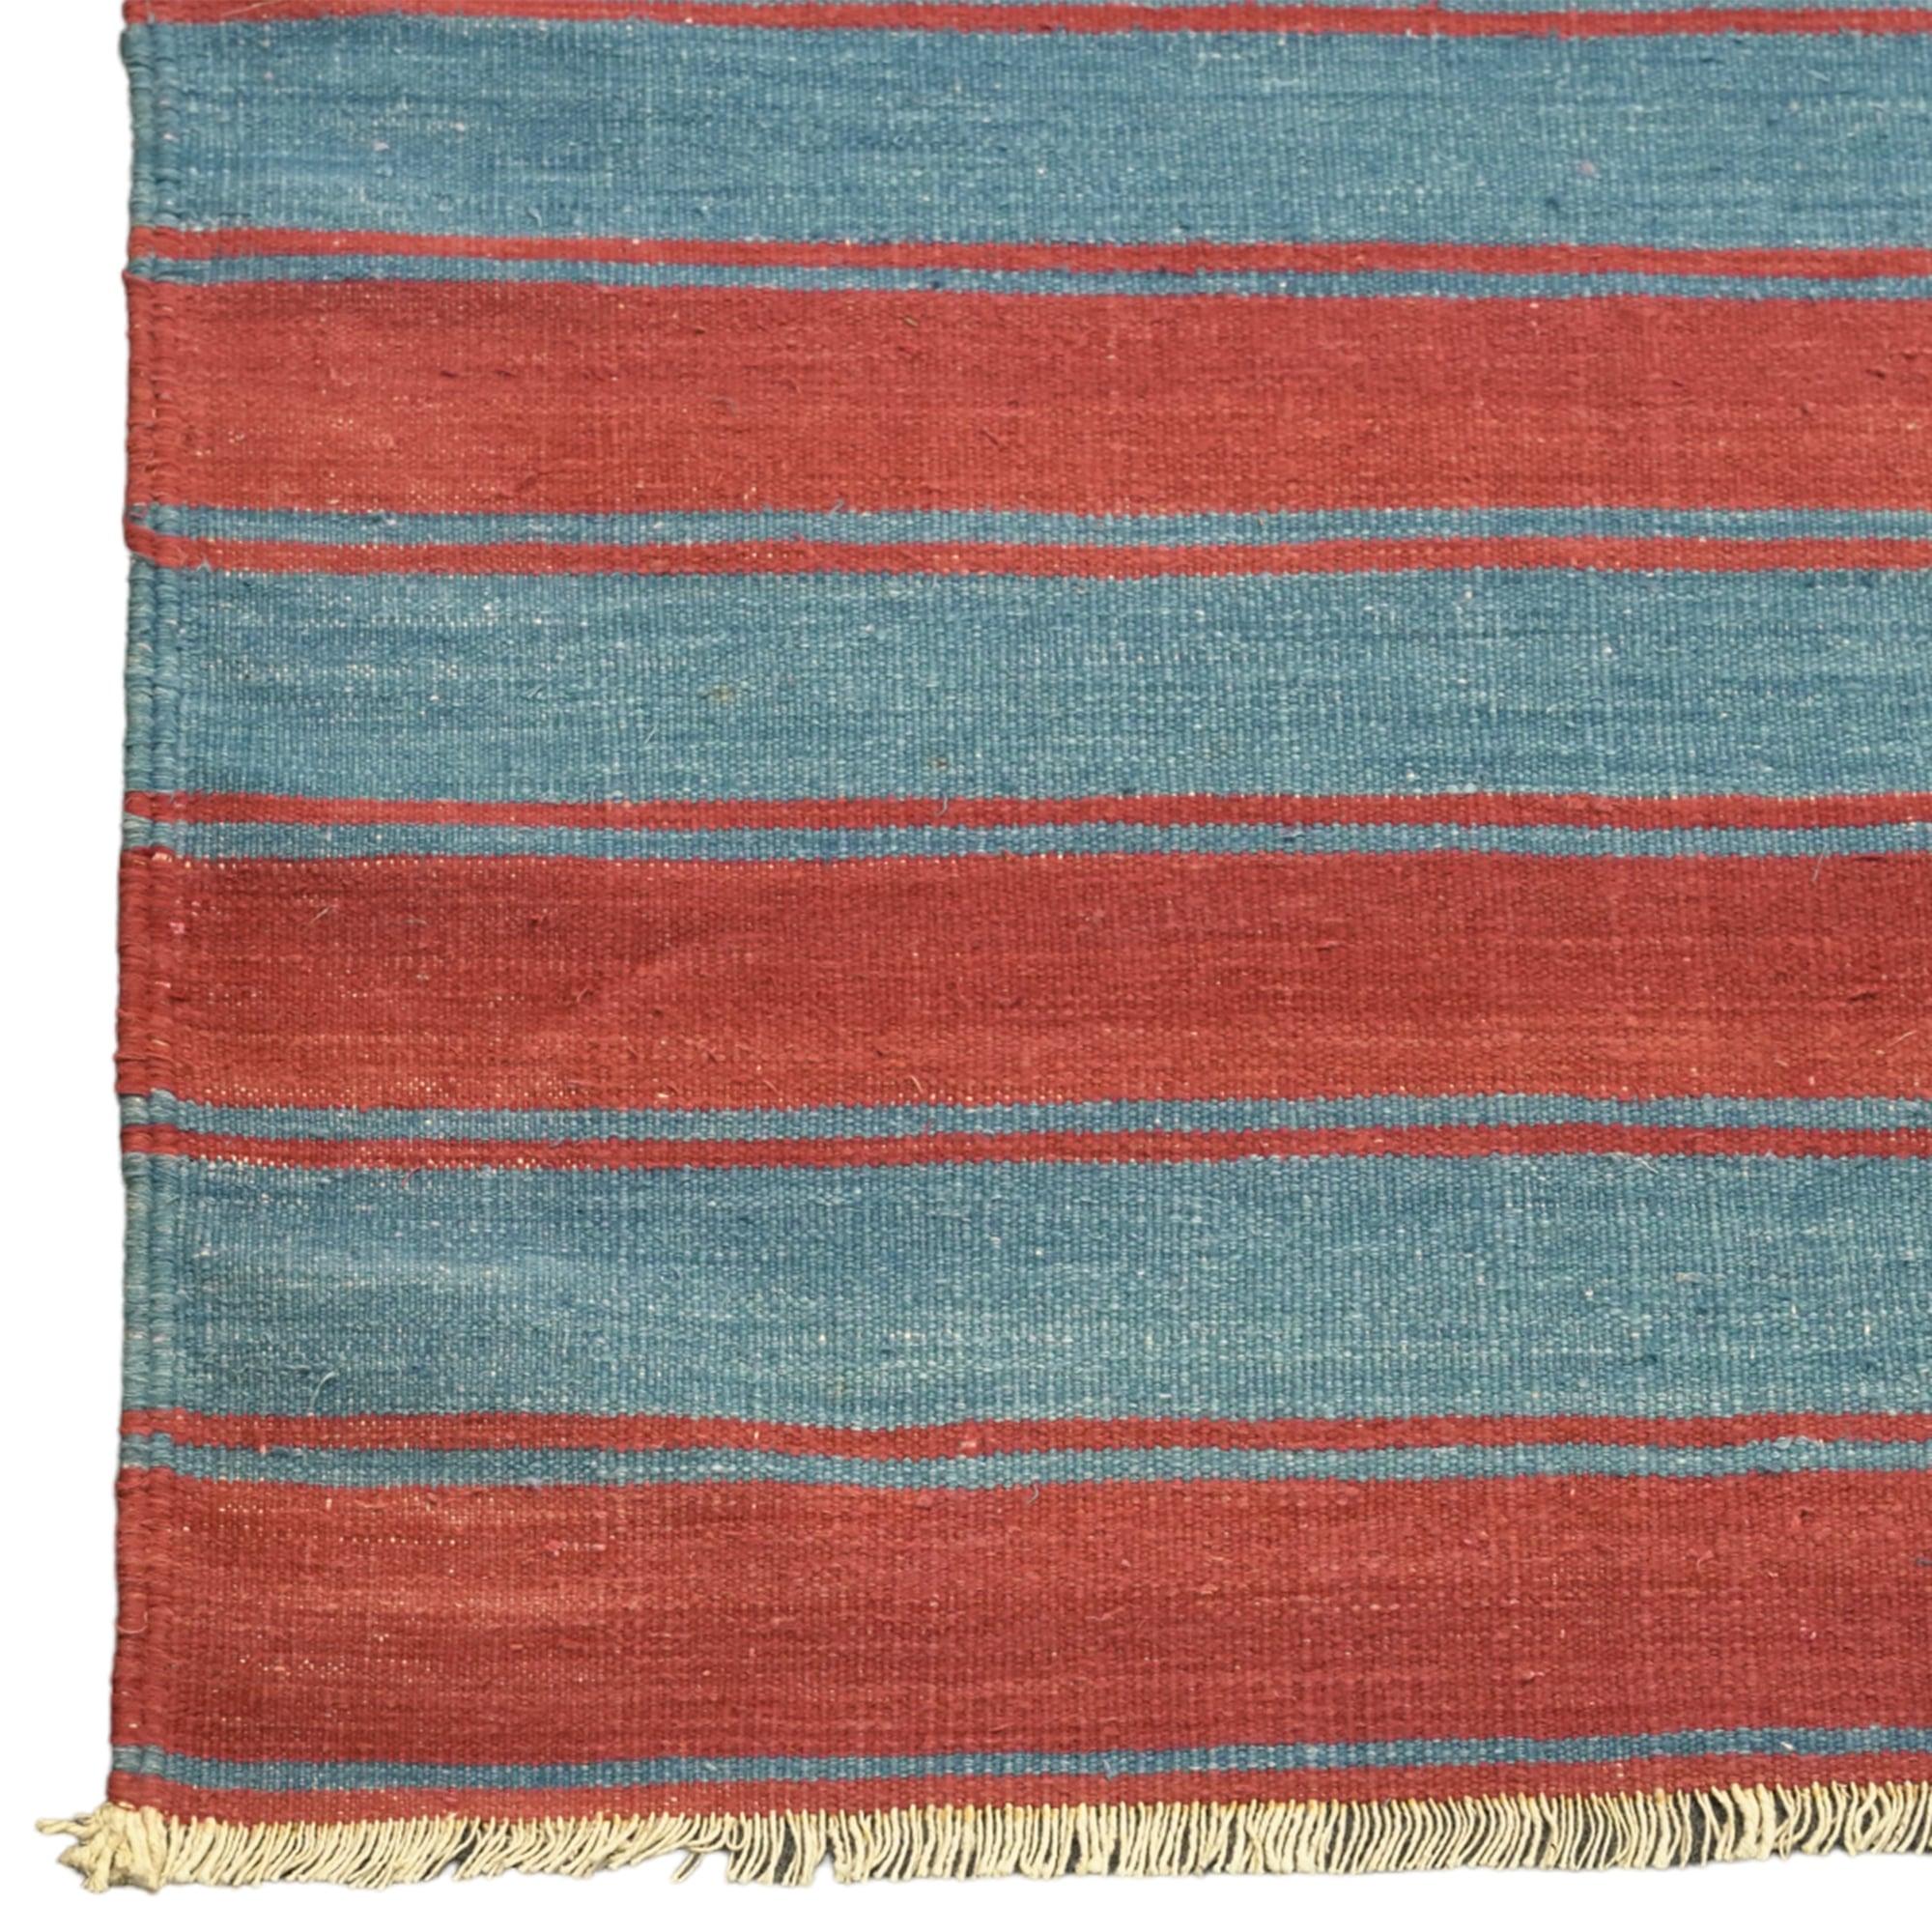 Hand-Woven Vintage Dhurrie Rug, with Red and Blue Stripes, from Rug & Kilim For Sale